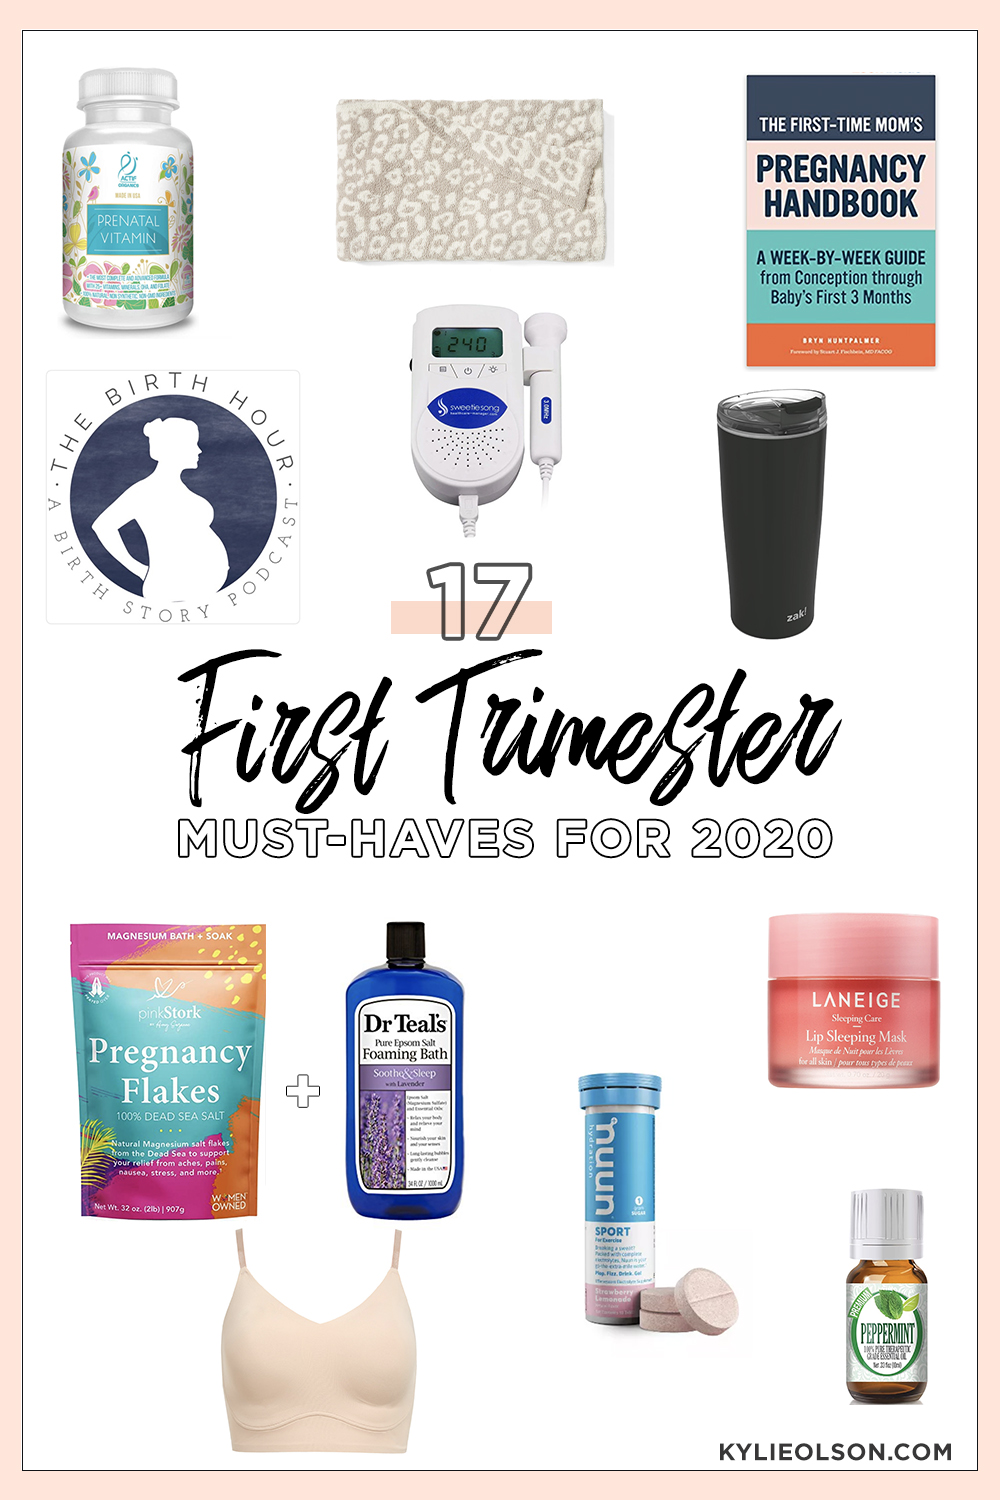 https://www.kylieolson.com/wp-content/uploads/2020/06/first-trimester-must-haves-pin-kylie.jpg